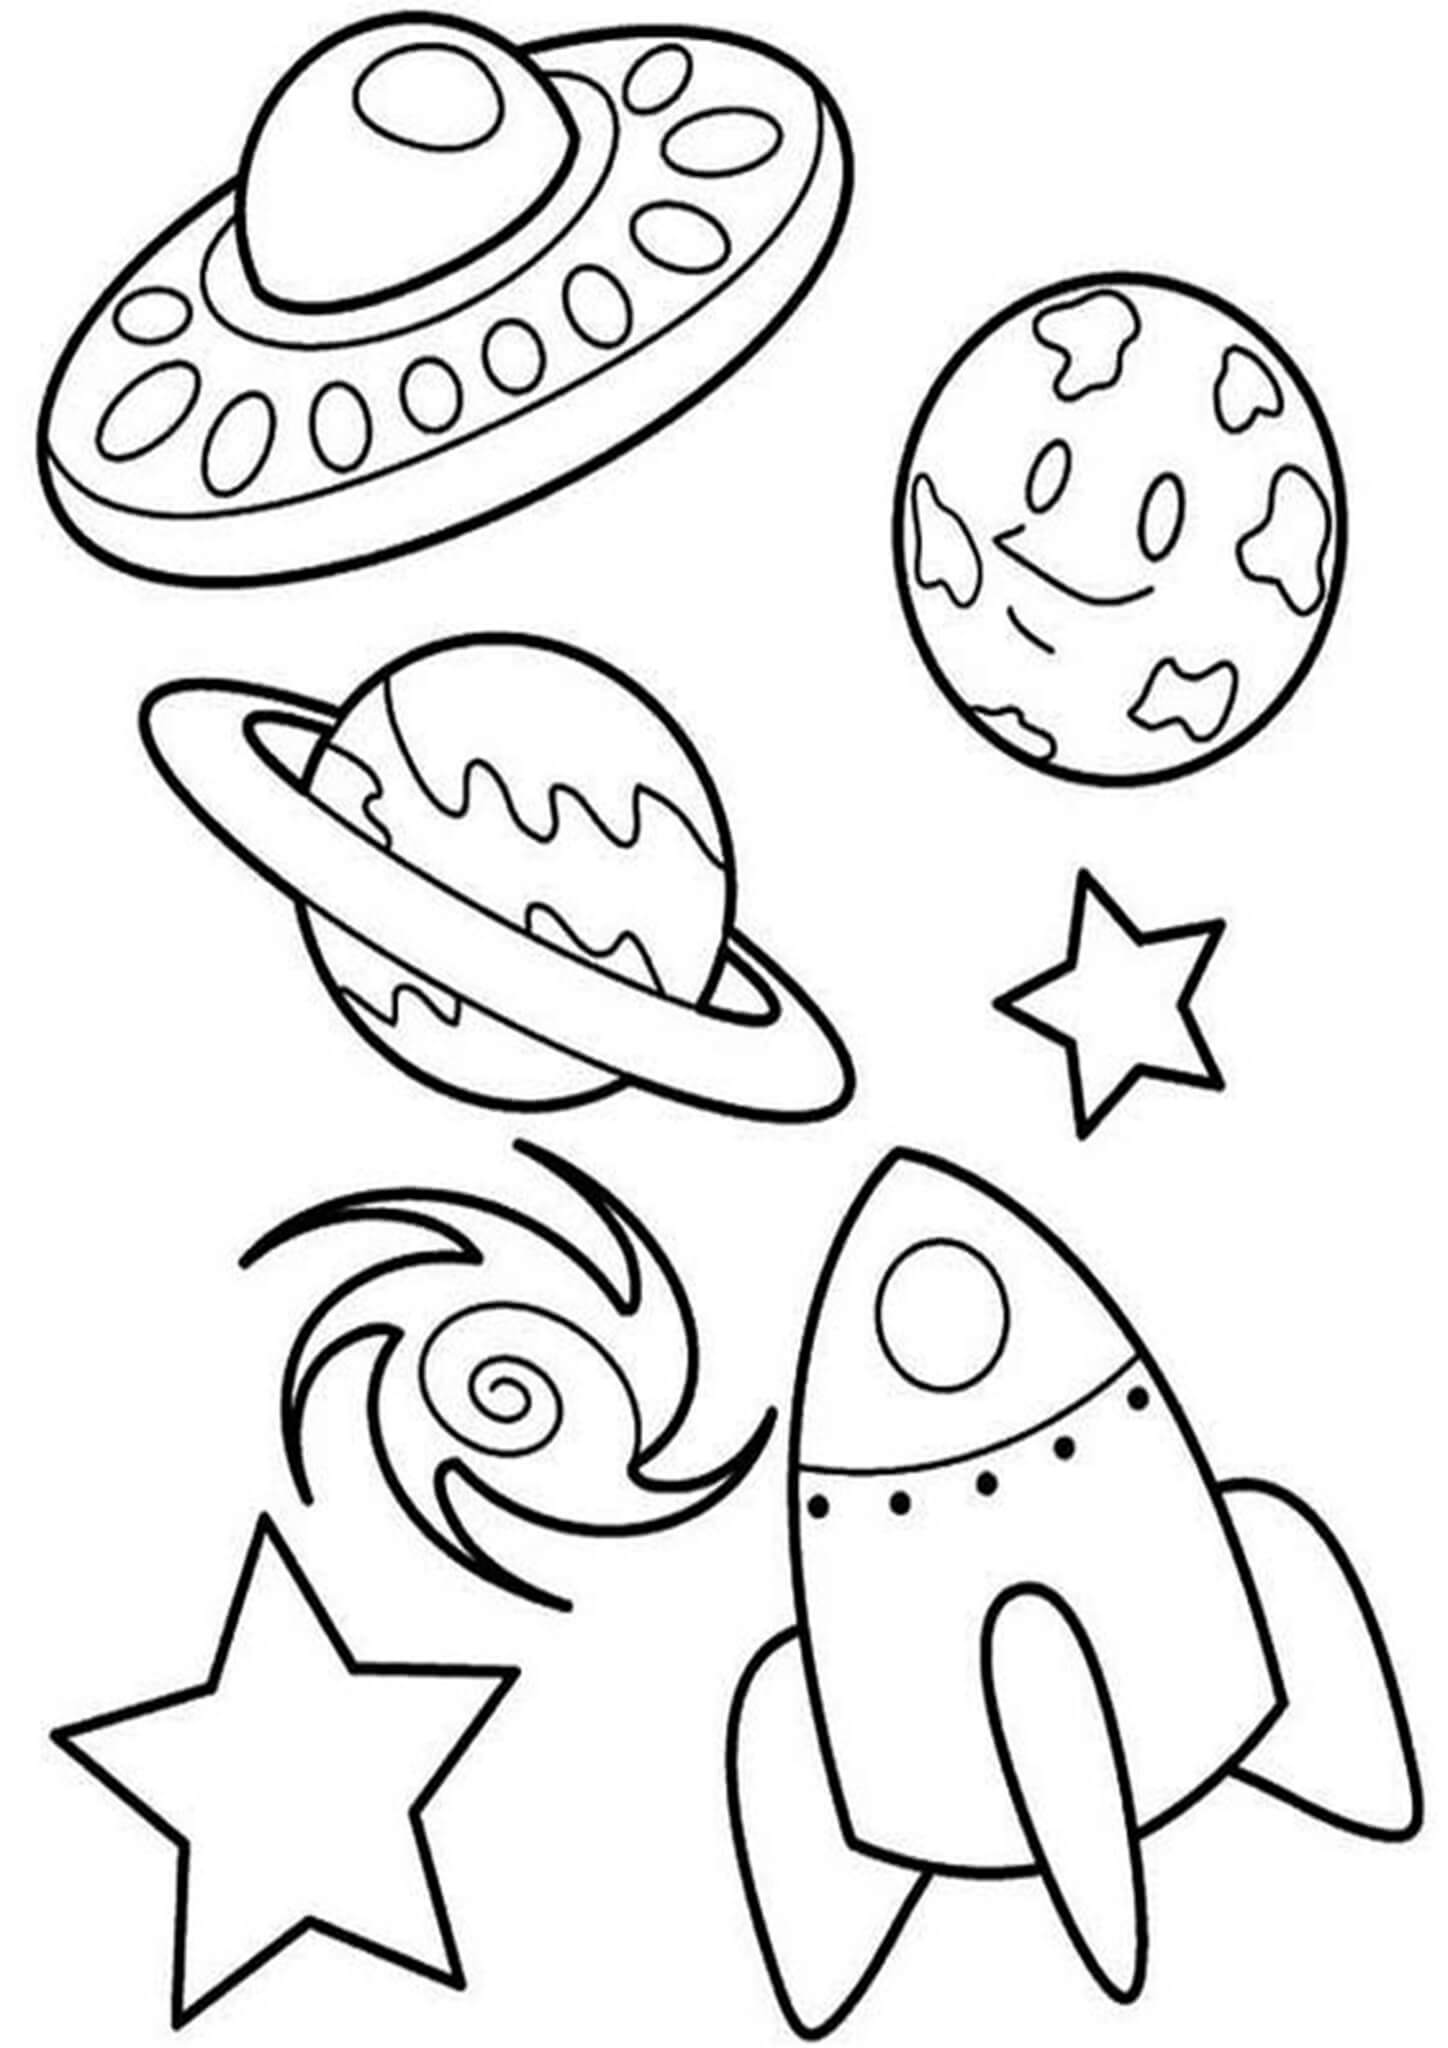 Space Coloring Pages For Kids Space Coloring Pages